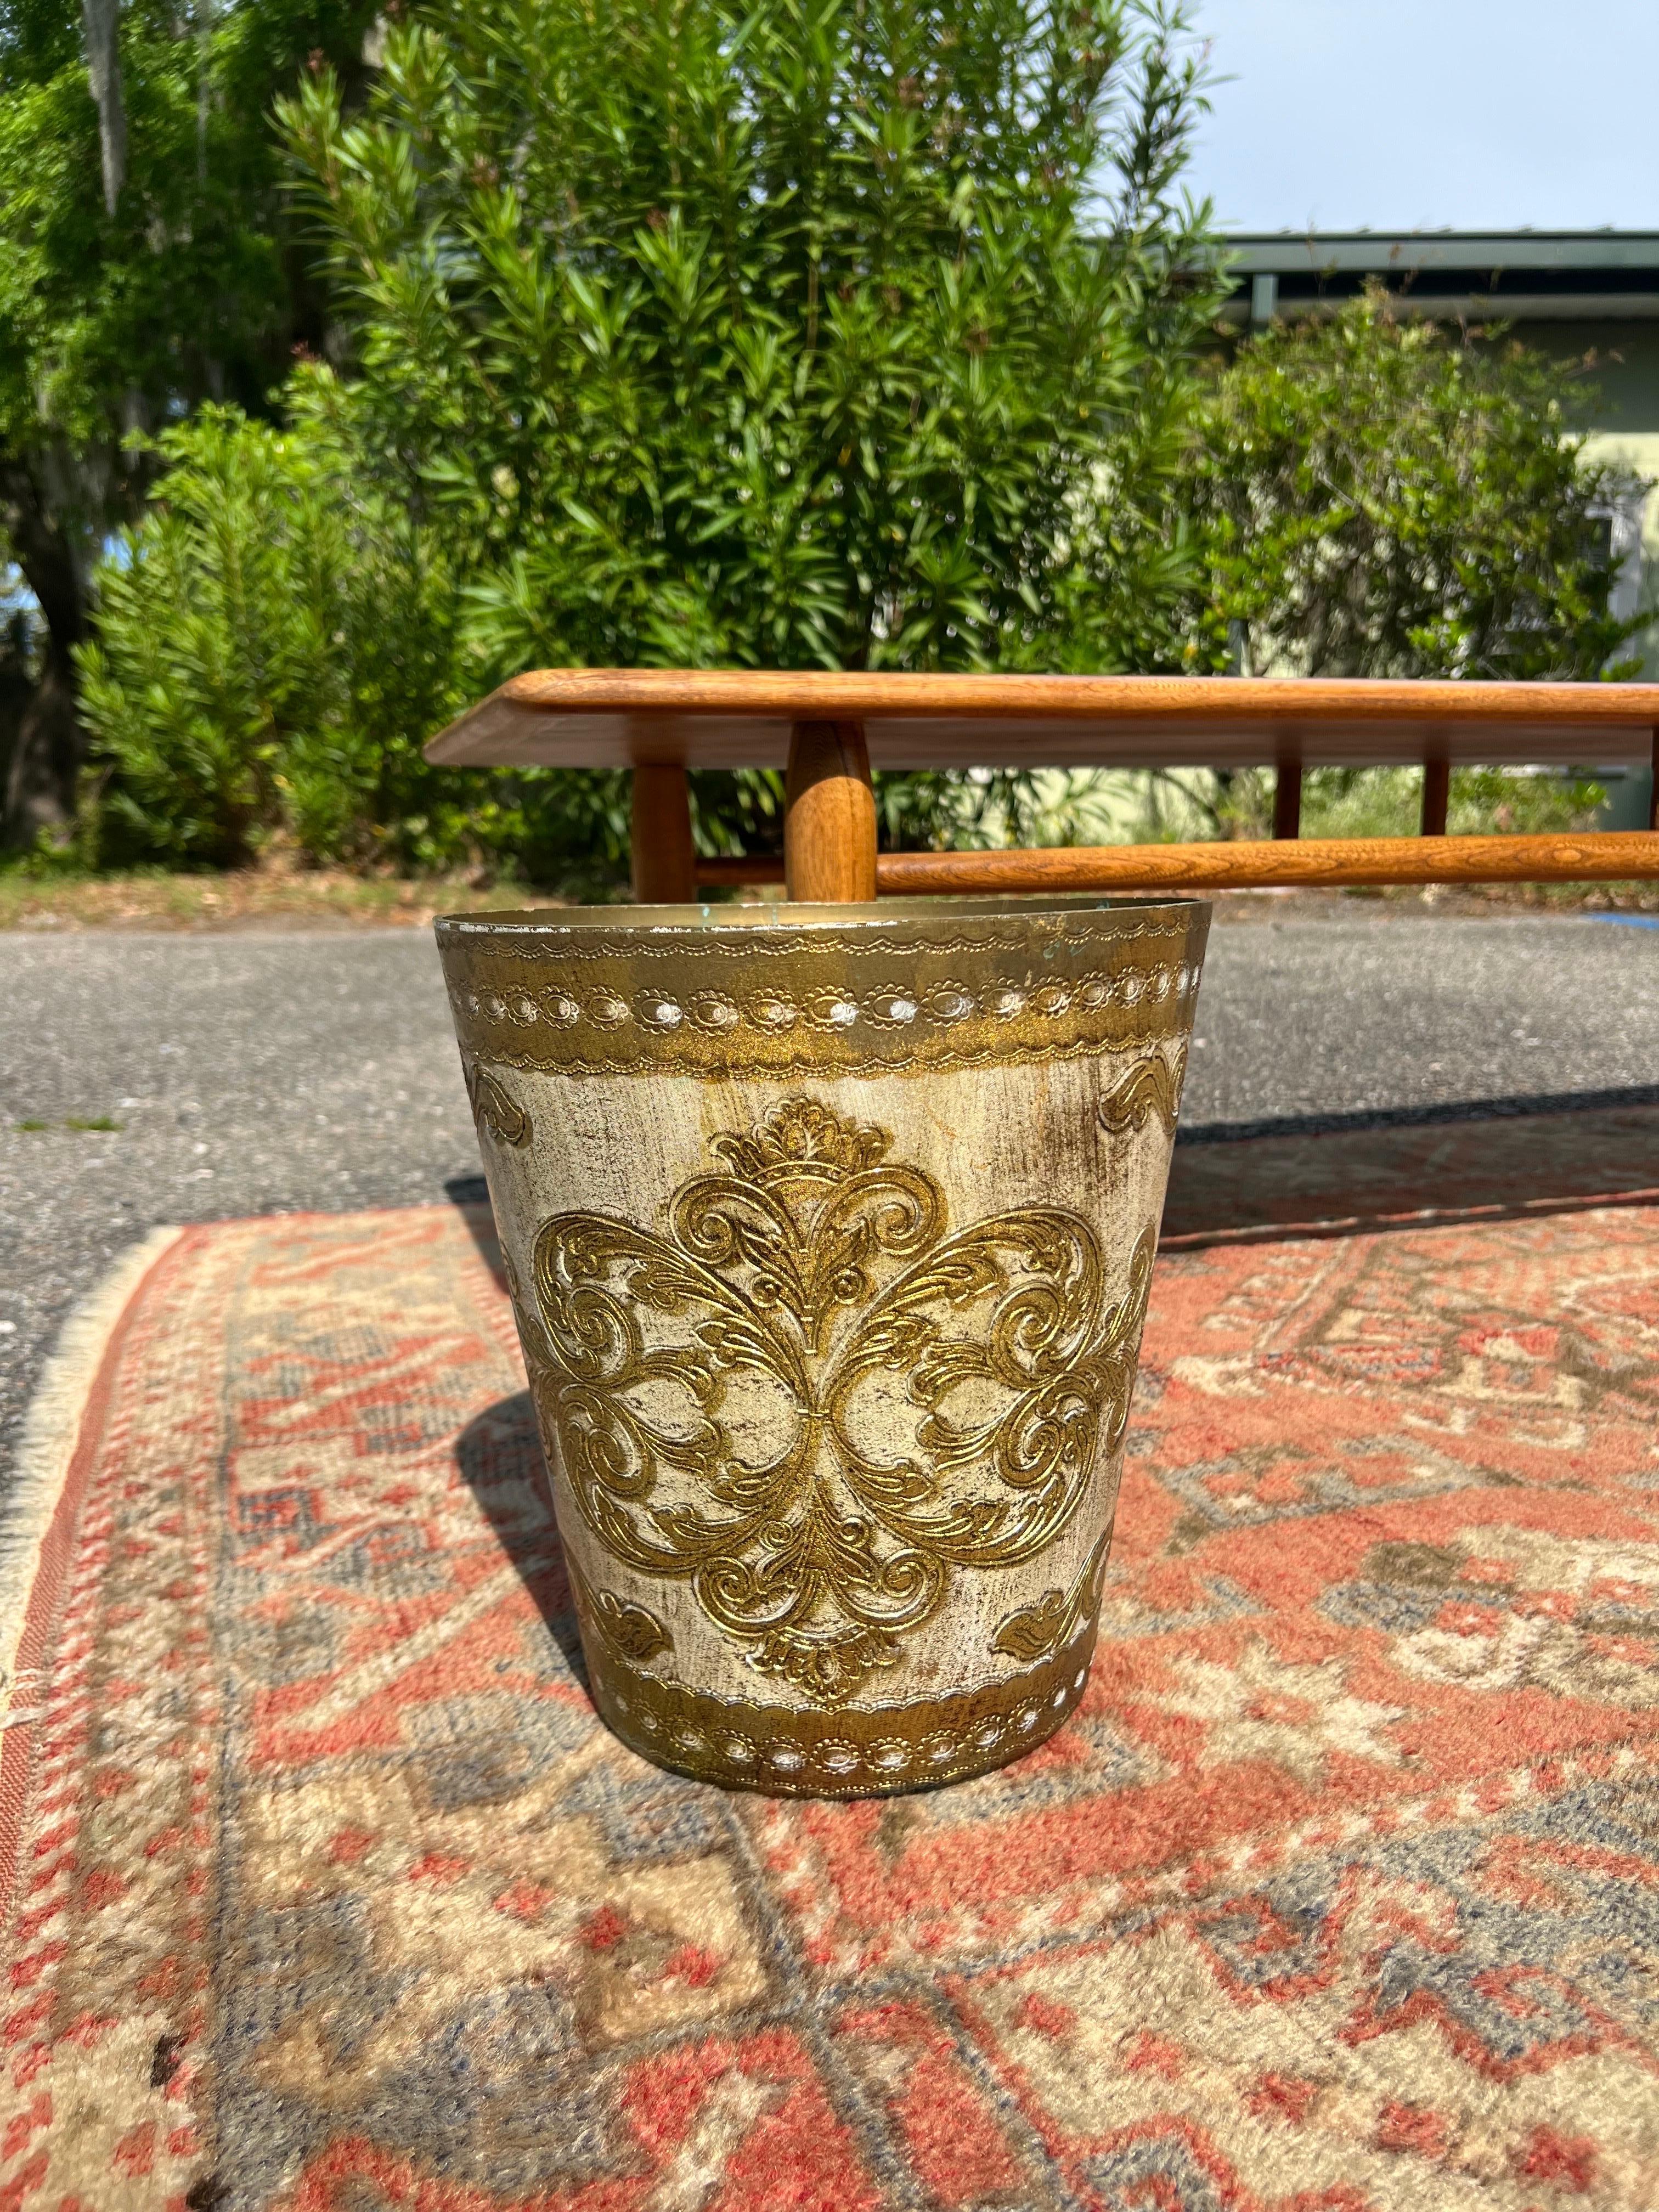 A stunning gold and cream Italian Florentine wastebasket, circa 1960. This is a superb piece in excellent condition.